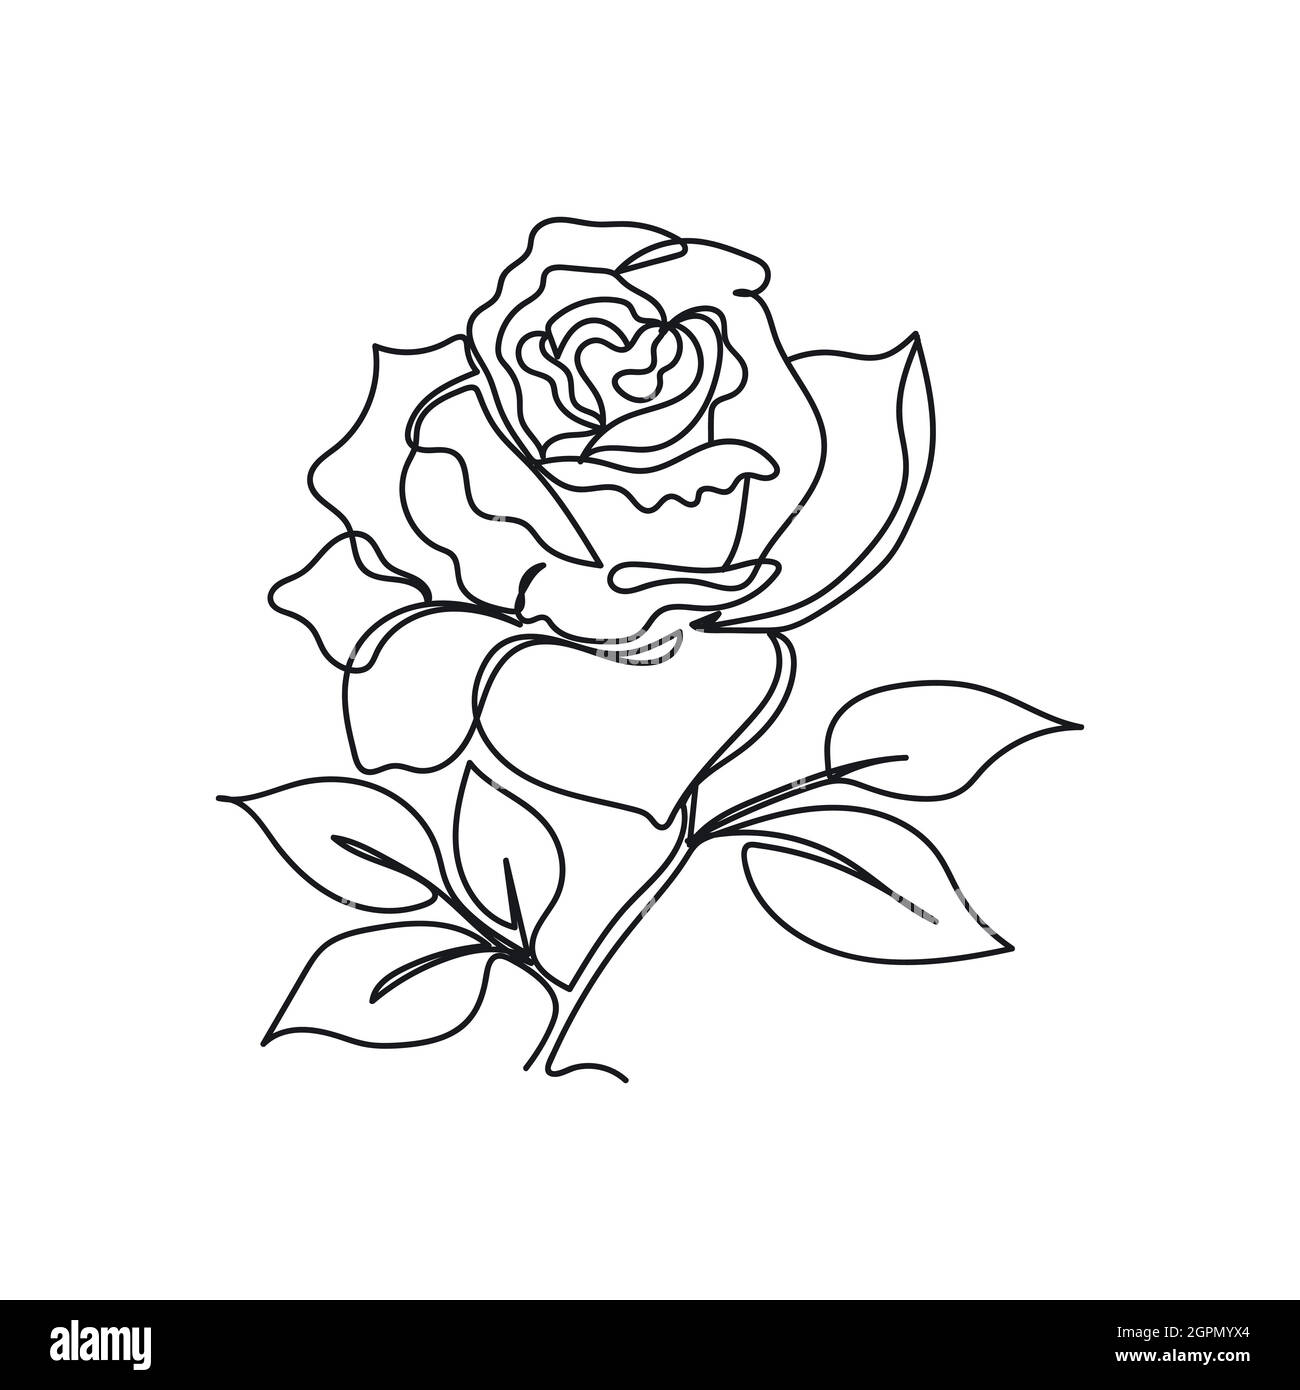 Continuous one line of flower rose in silhouette. Minimal style. Perfect for cards, party invitations, posters, stickers, clothing. Black abstract icon. Stock Vector